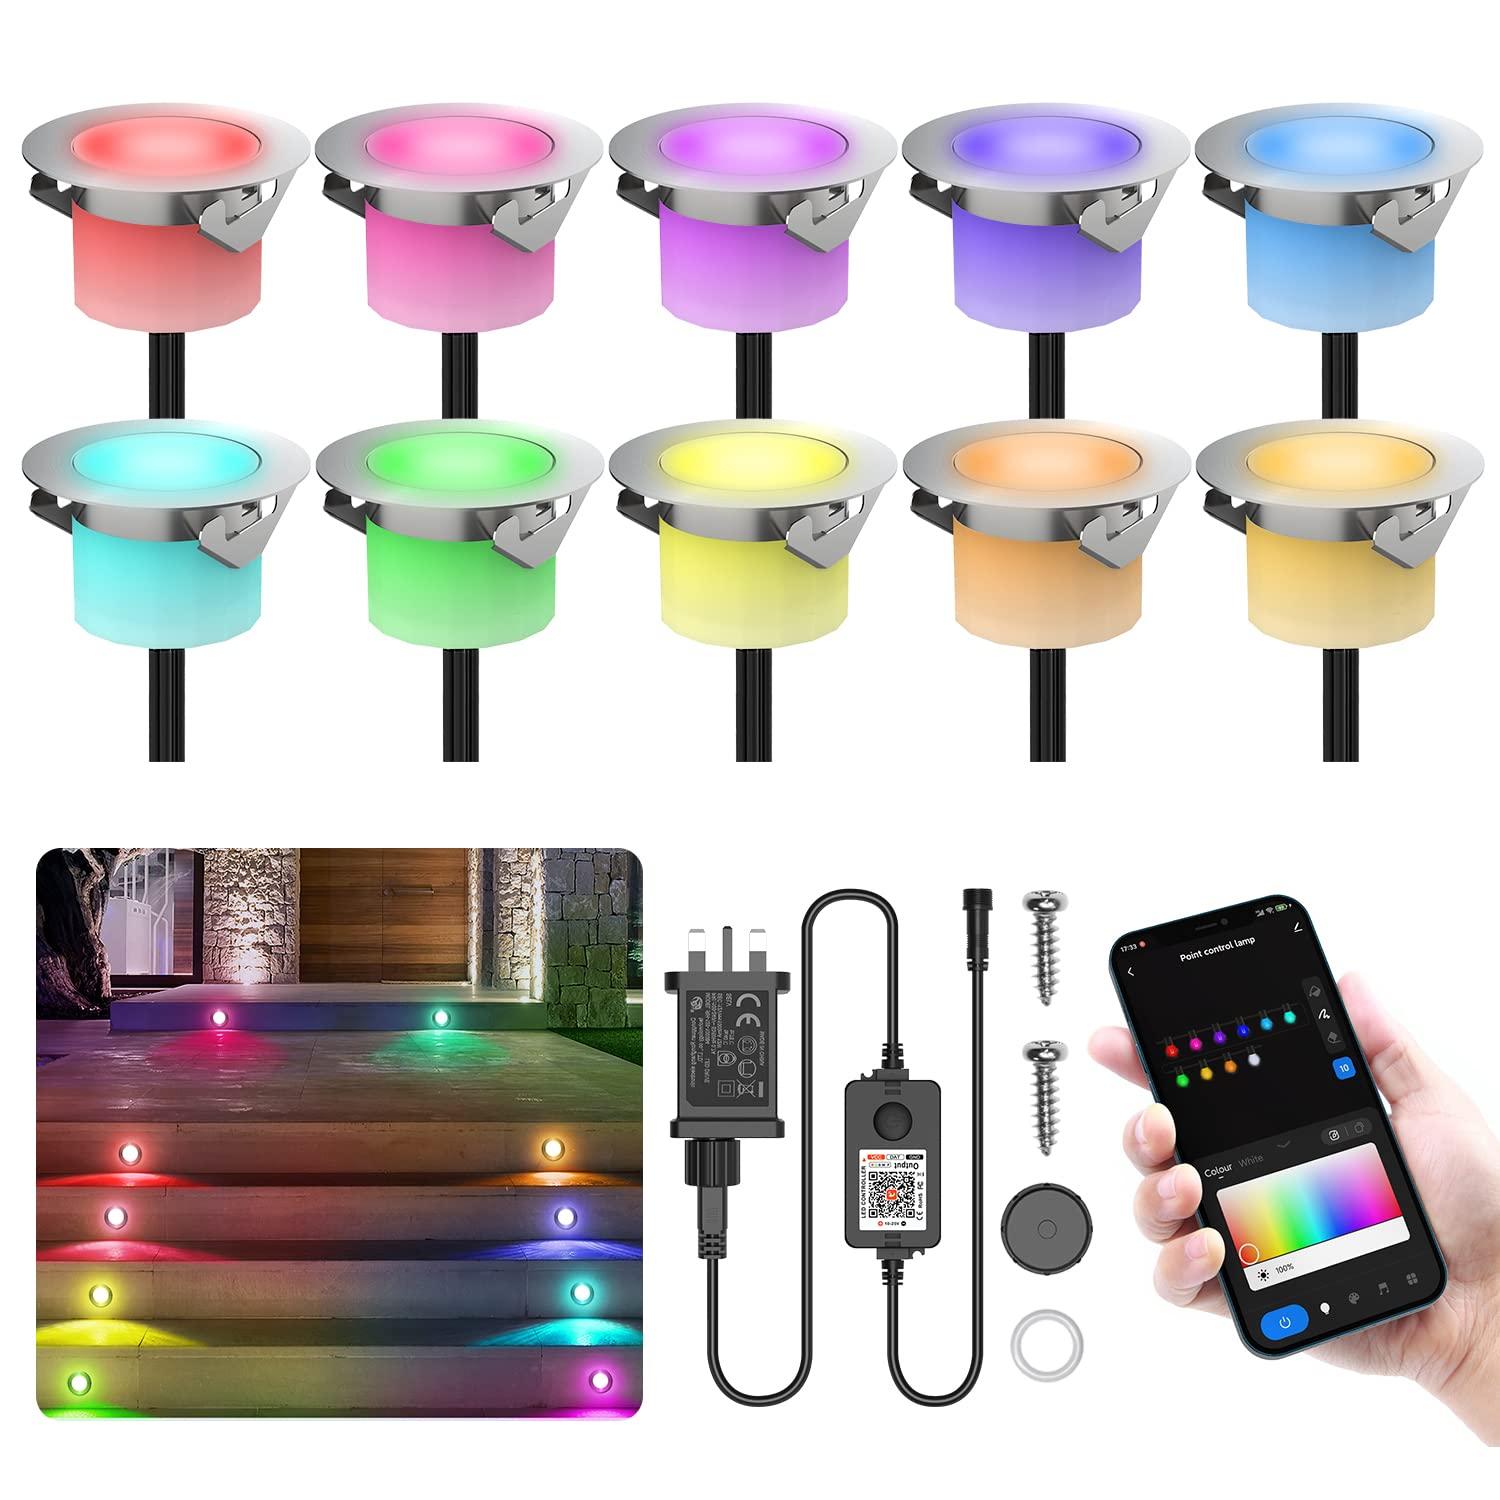 10-Pack RGBP WiFi Led Decking Lights,Ø30MM + WiFi Voice Control with Tuya APP,DIY Color Settings,IP67waterproof,12V Dreamcolor Chasing Decking Lights Work with Alexa and Google Assistant